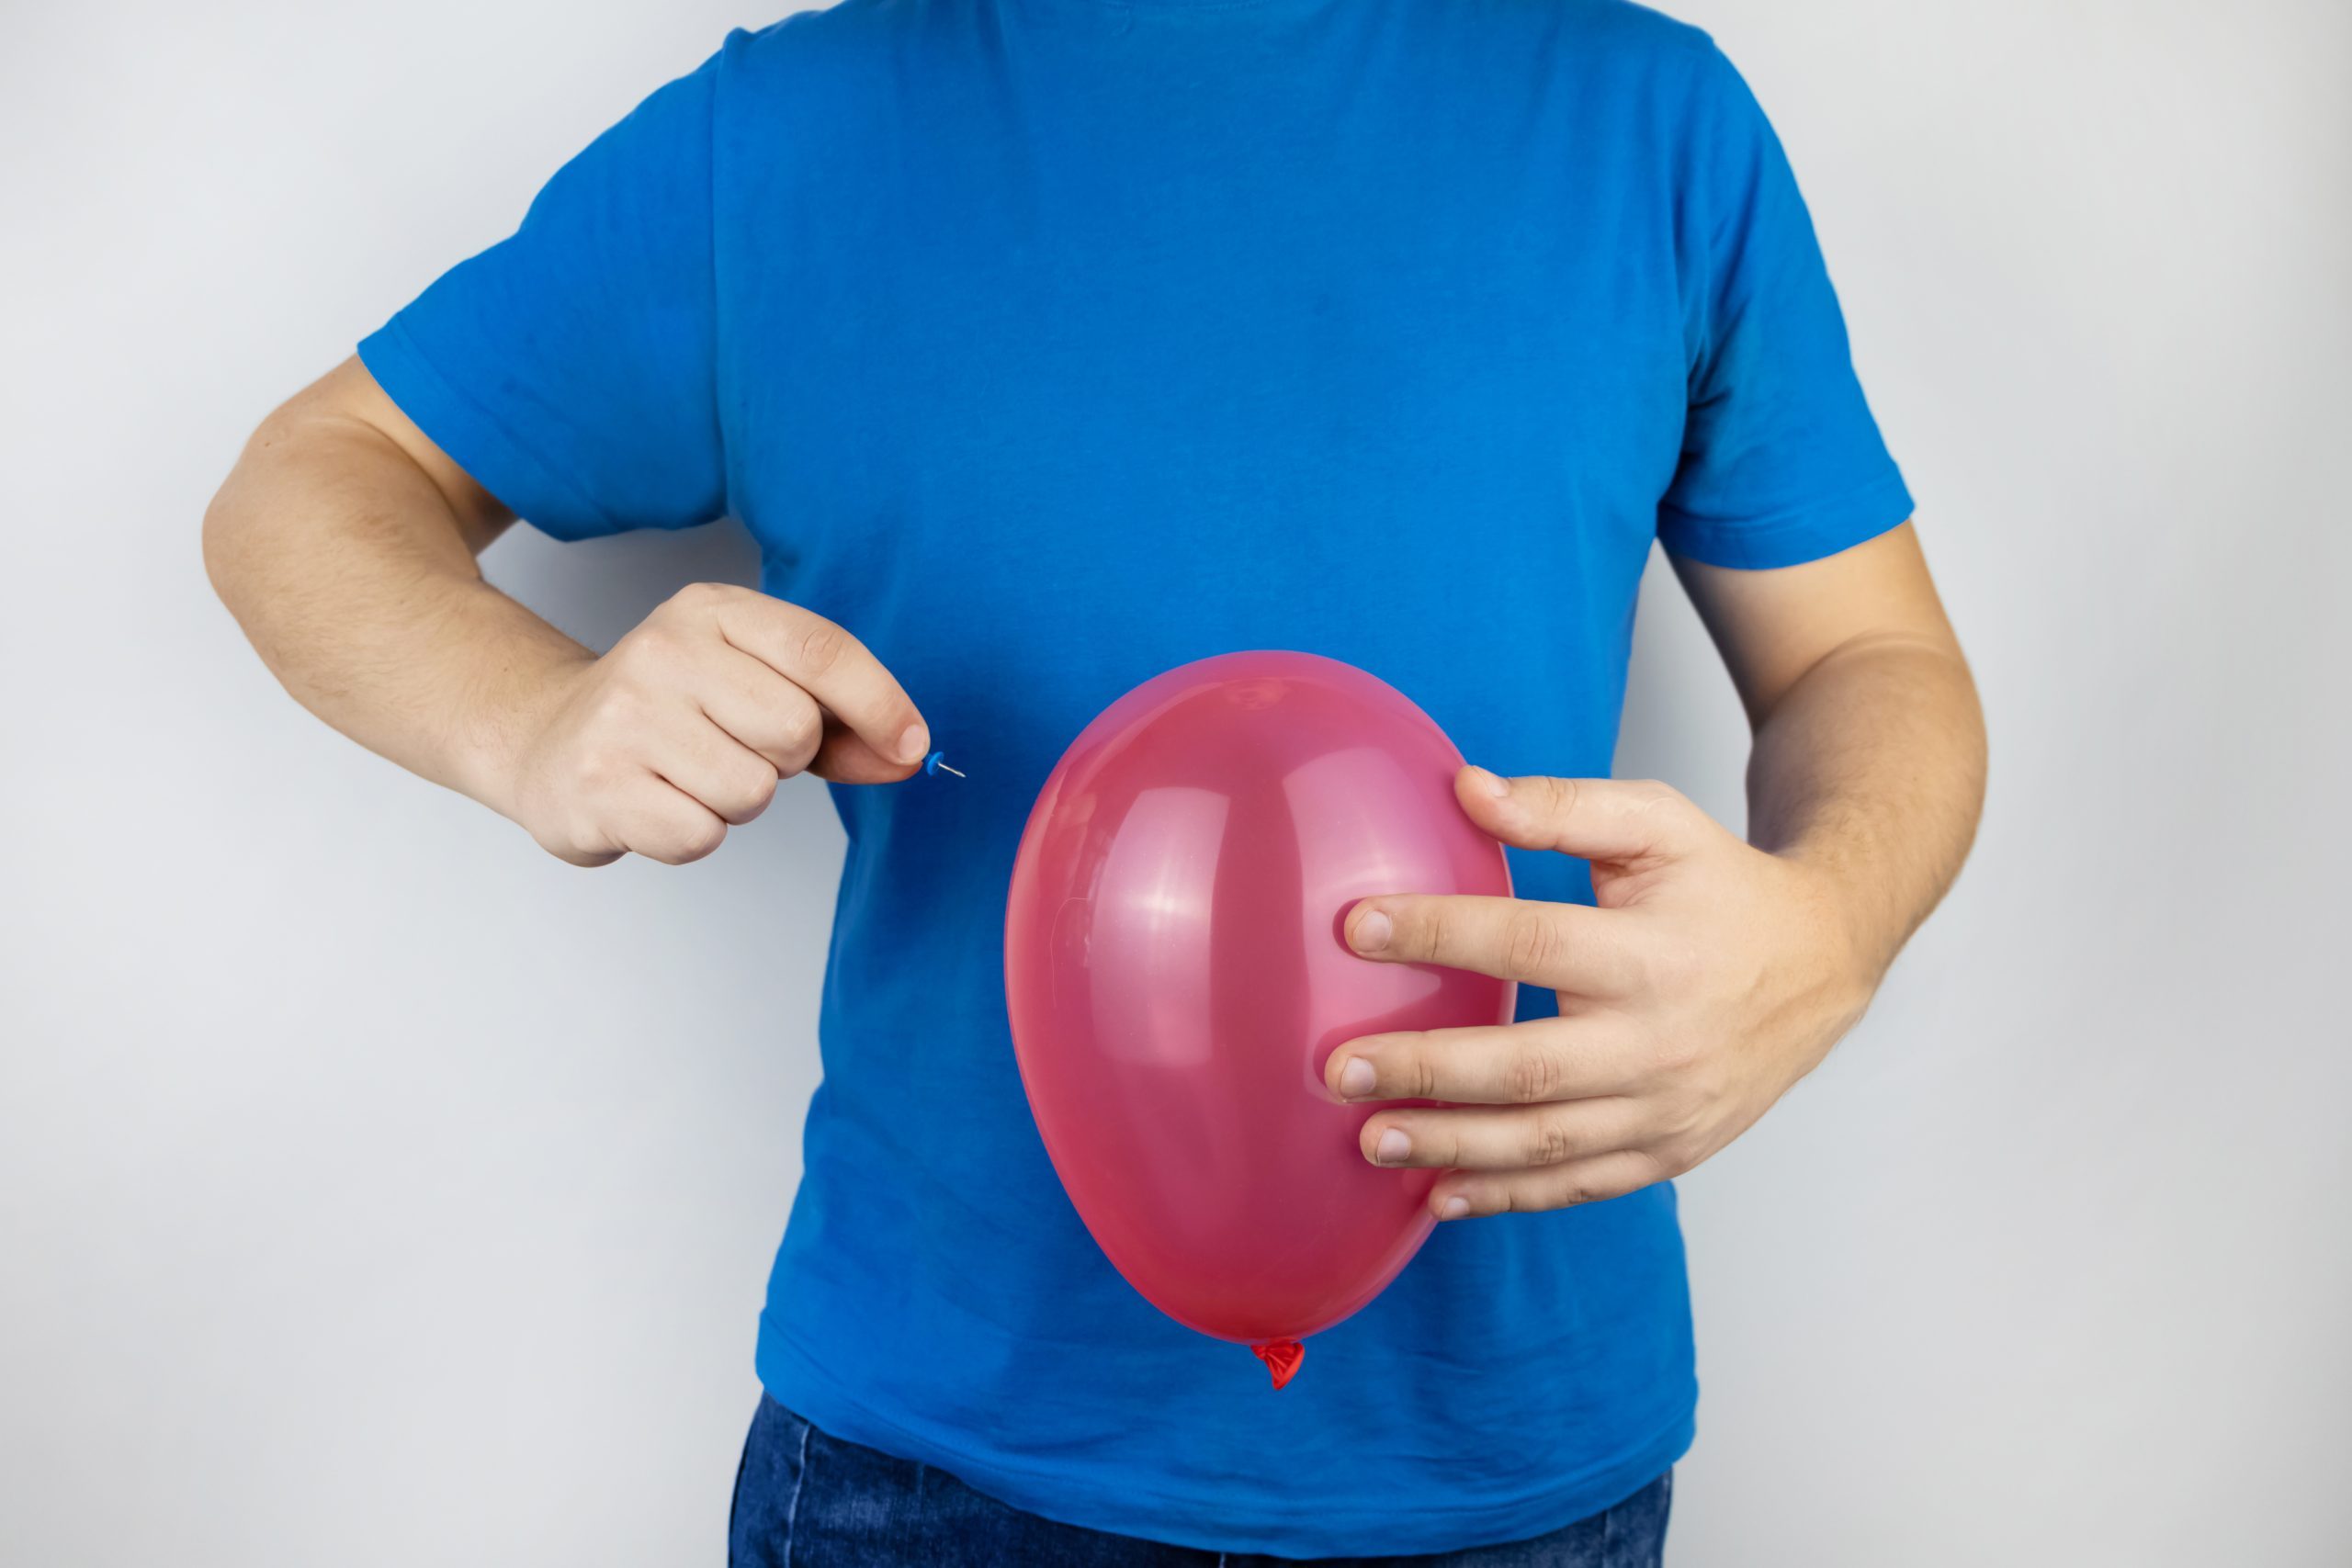 Conceptual photography. The man holds a red ball near his belly, which symbolizes bloating and flatulence. Then he brings a needle to it to burst the balloon and thus get rid of the problem.